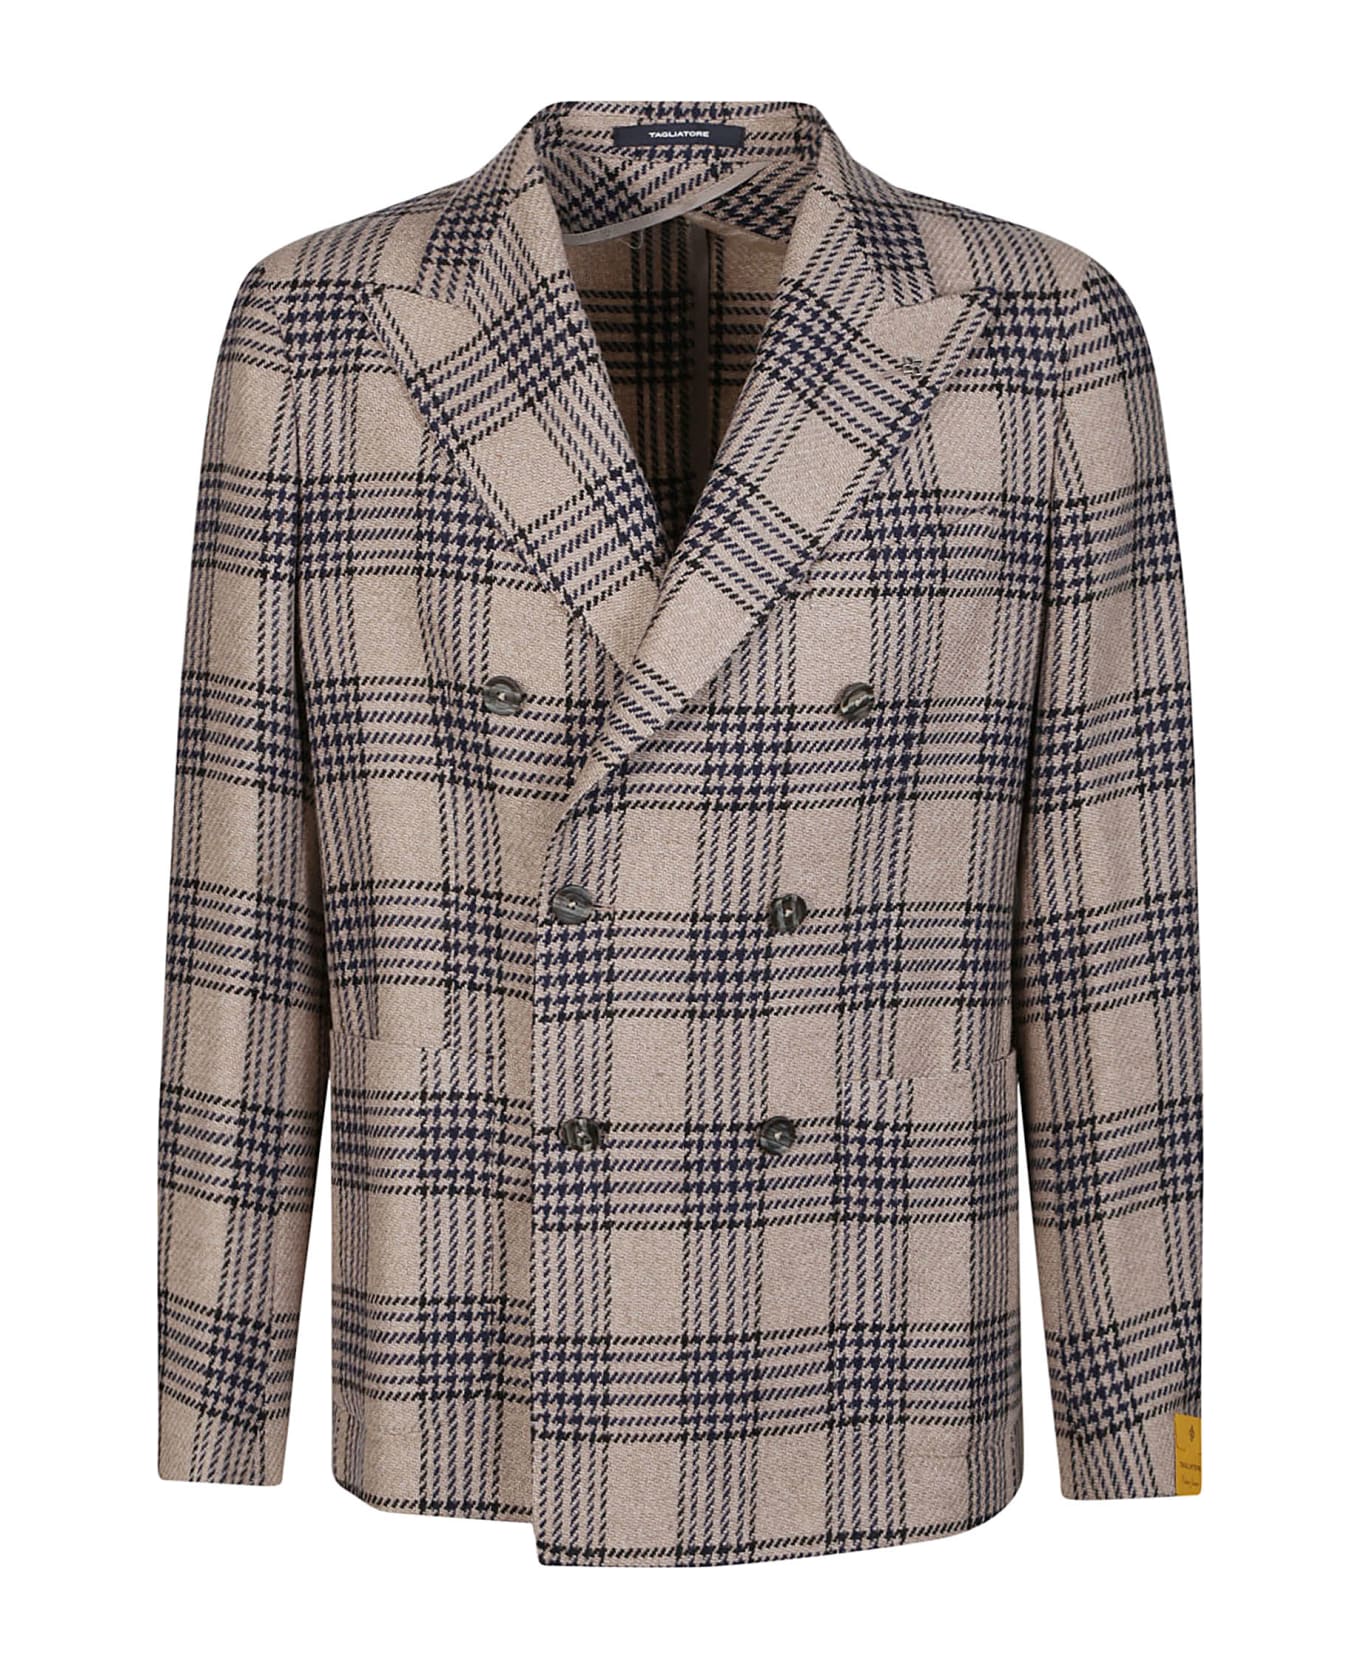 Tagliatore Double-breasted Jacket - Tabacco